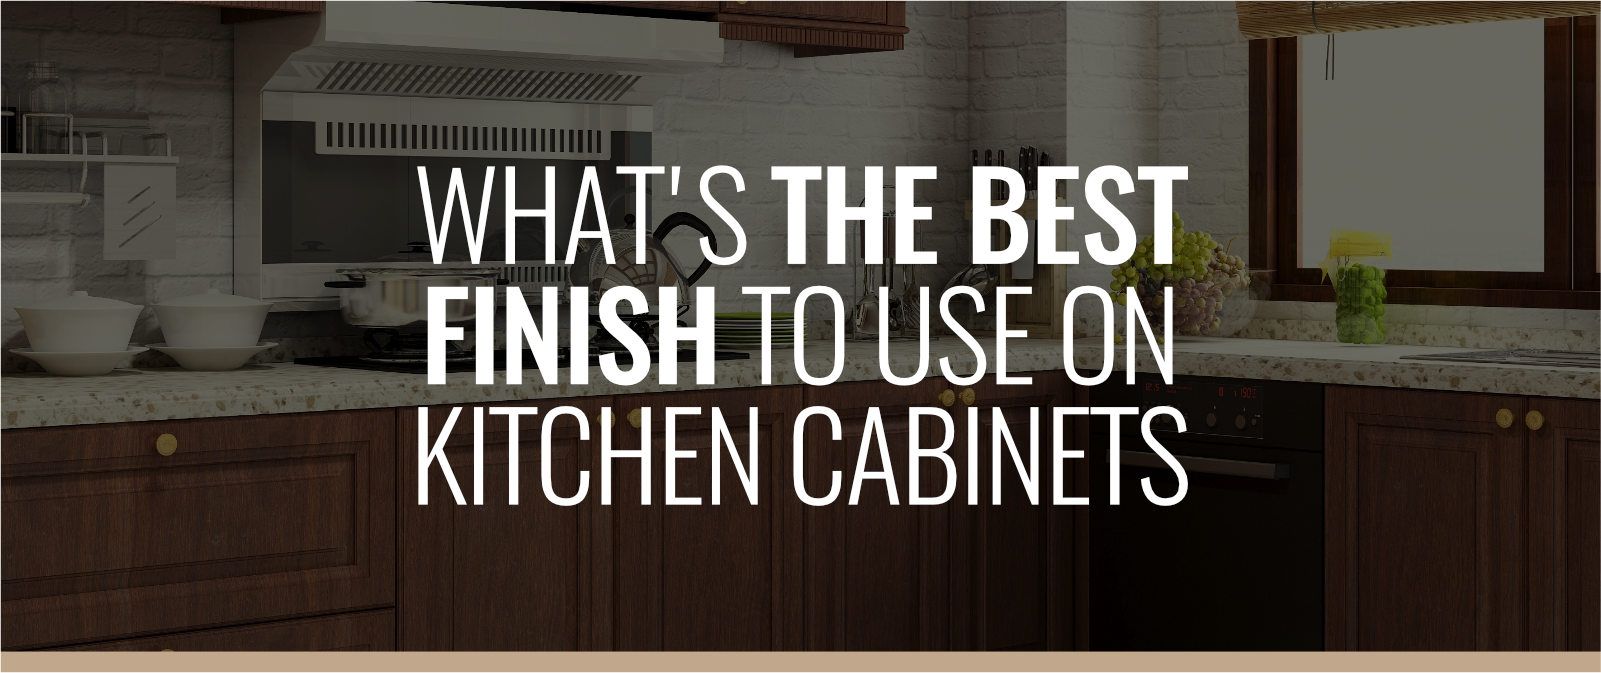 WHAT'S THE BEST FINISH TO USE ON KITCHEN CABINETS